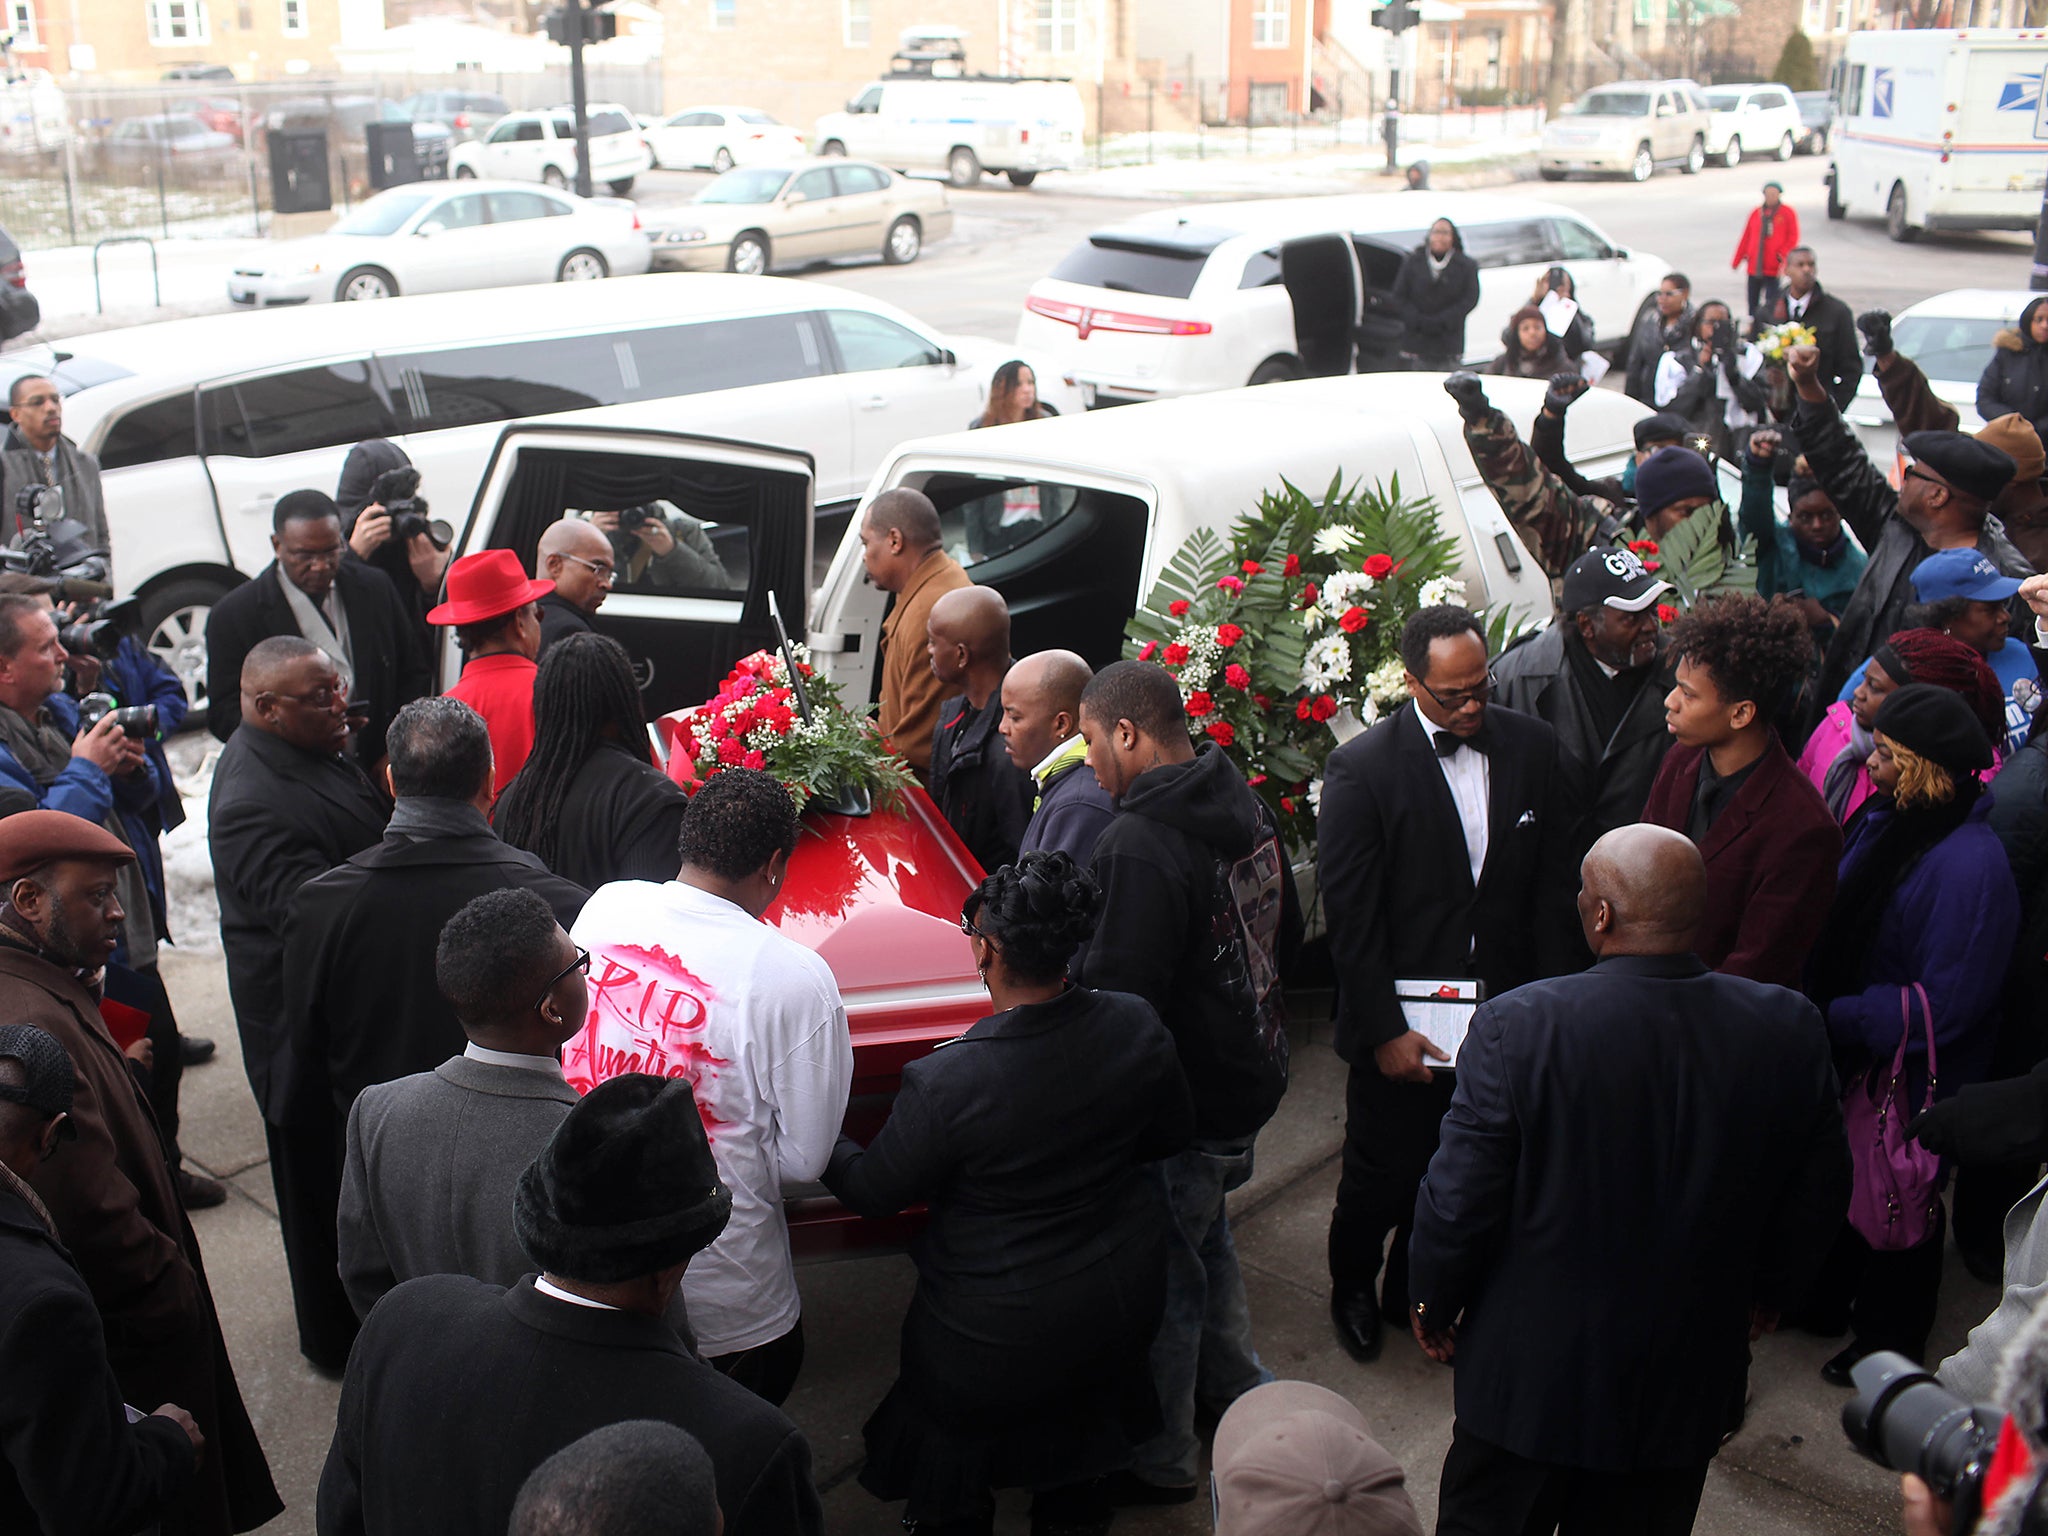 Pallbearers carry the casket of Bettie Jones during her funeral at New Mount Pilgrim Missionary Baptist Church